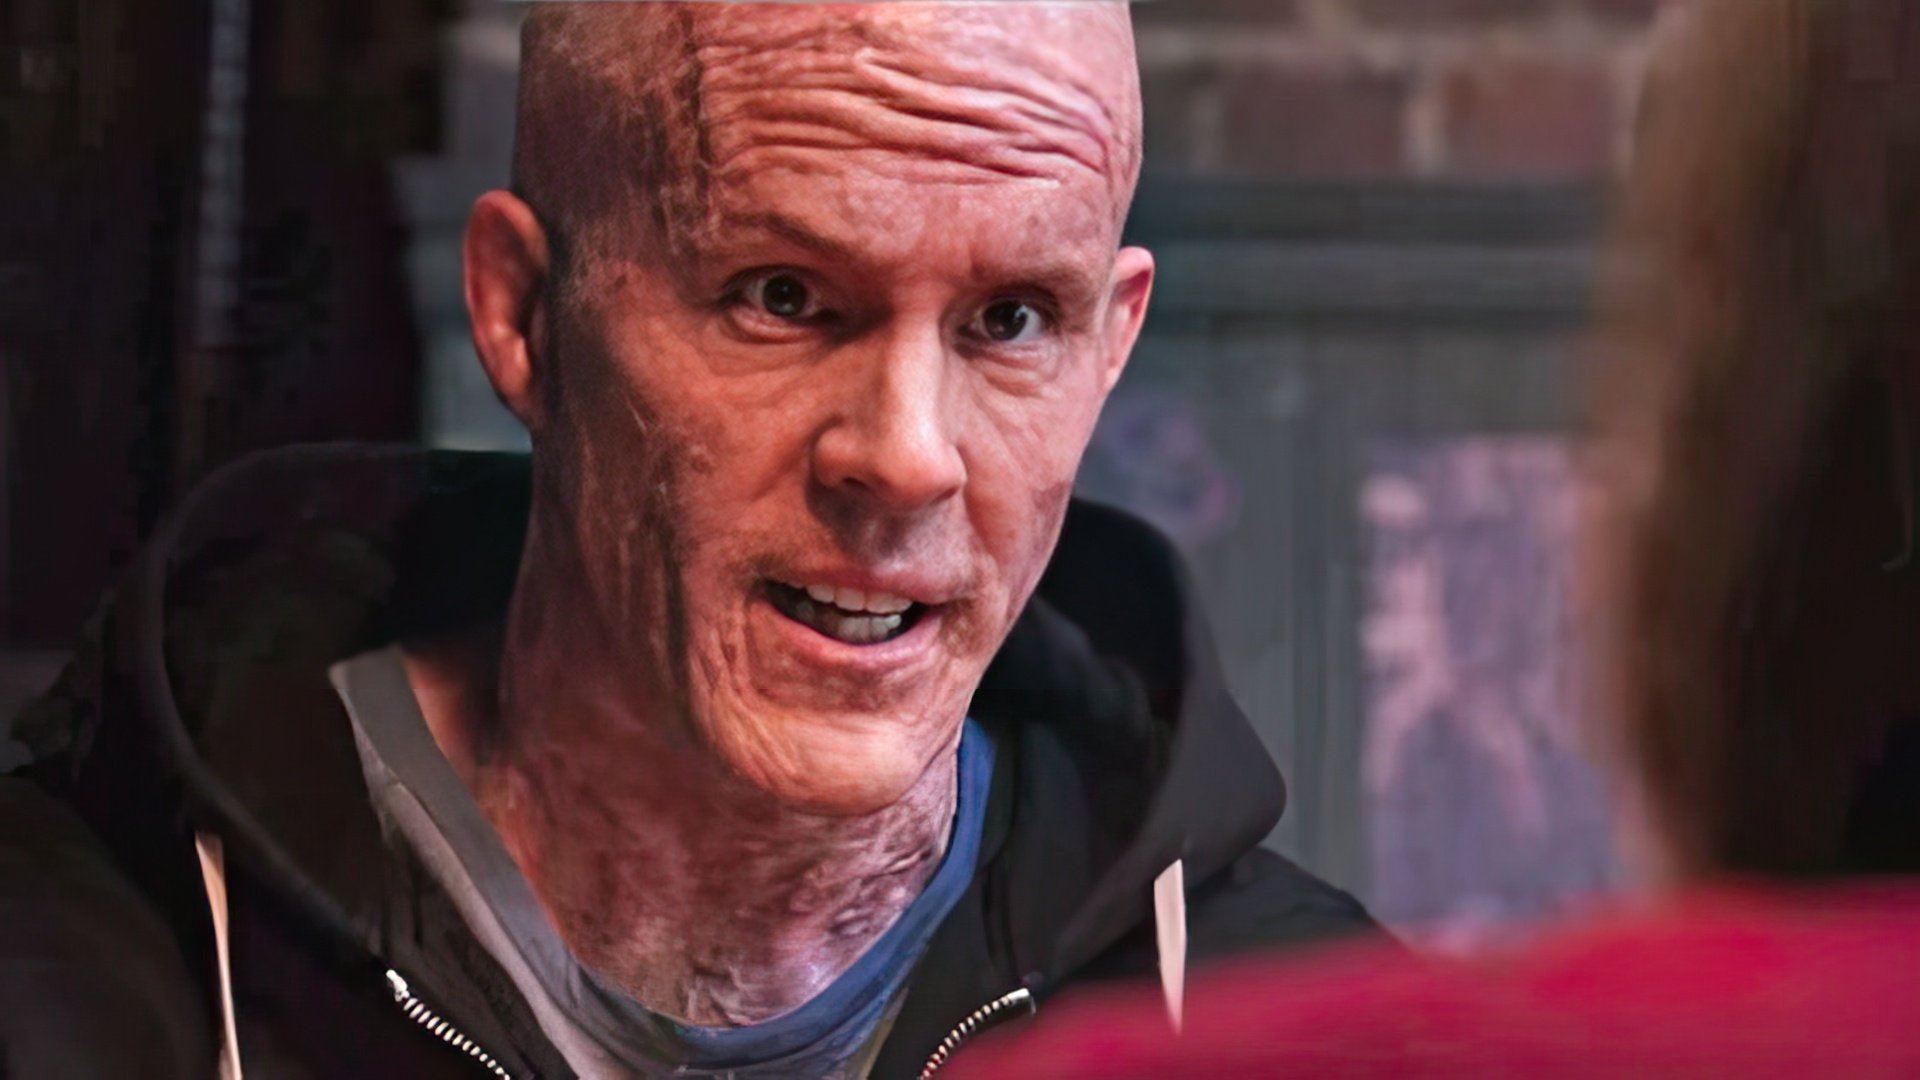 Reynolds spent hours in the makeup chair during Deadpool shooting